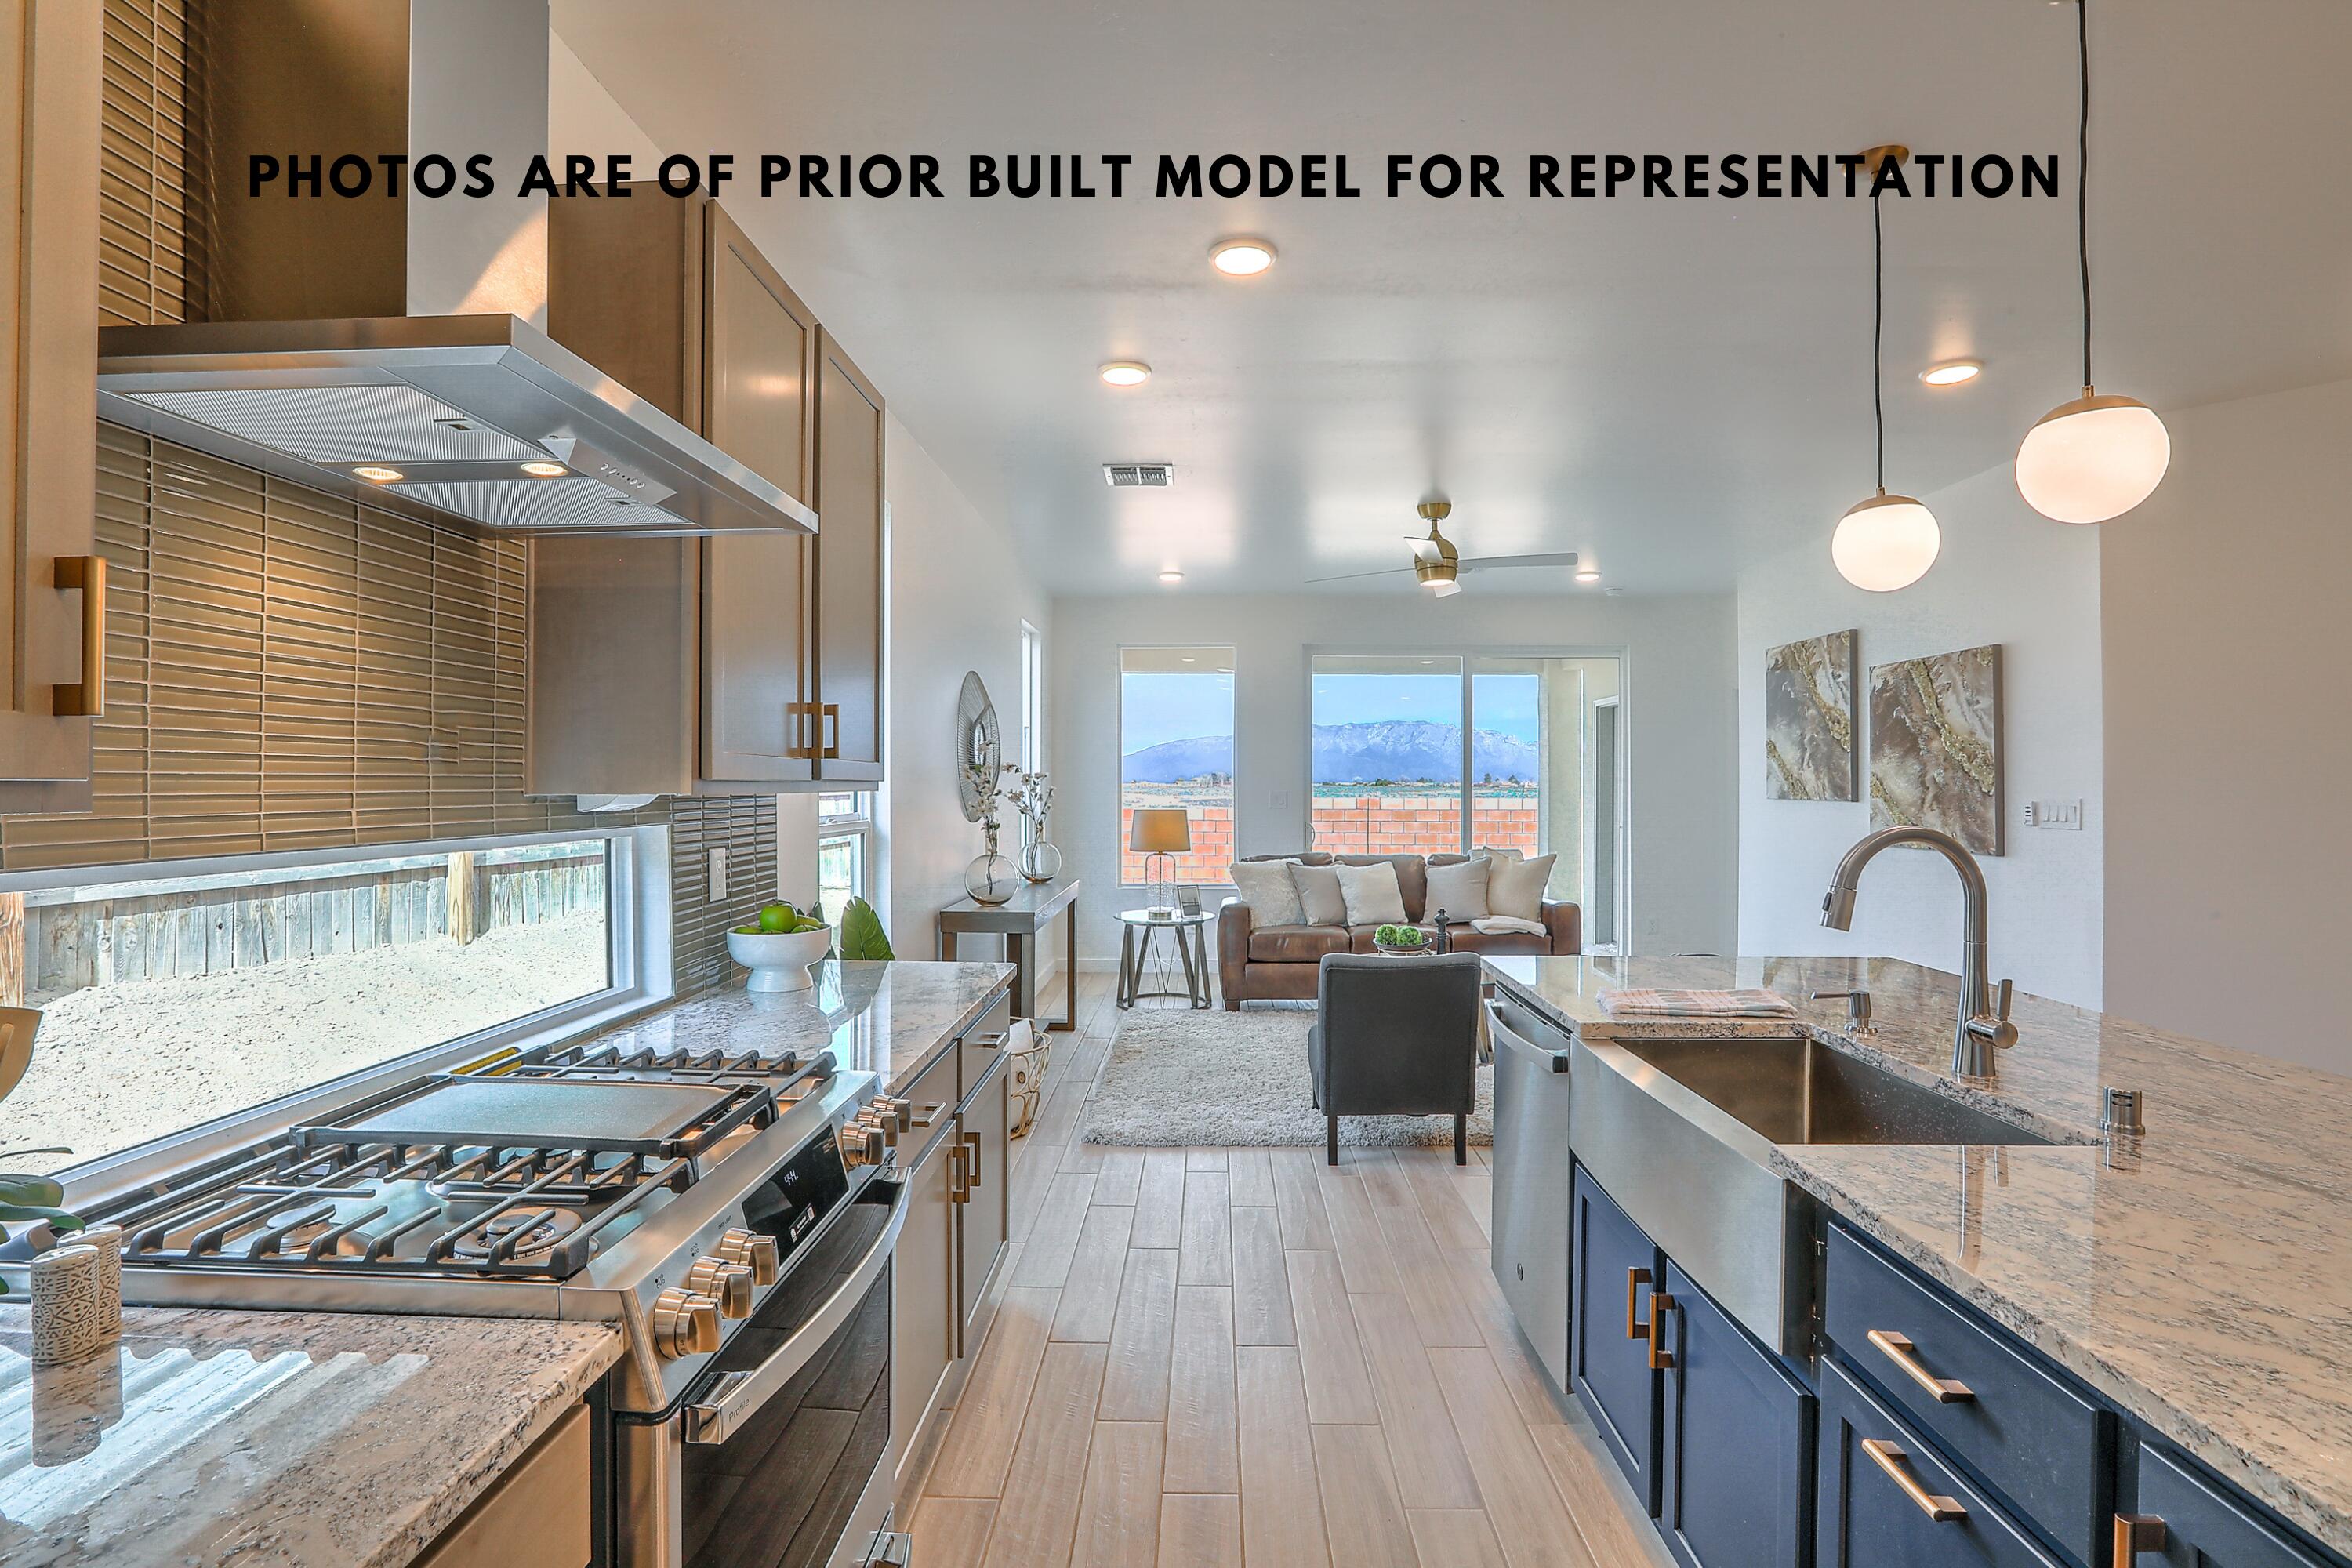 513 2nd Street NE, Rio Rancho, New Mexico 87124, 4 Bedrooms Bedrooms, ,3 BathroomsBathrooms,Residential,For Sale,513 2nd Street NE,1043068